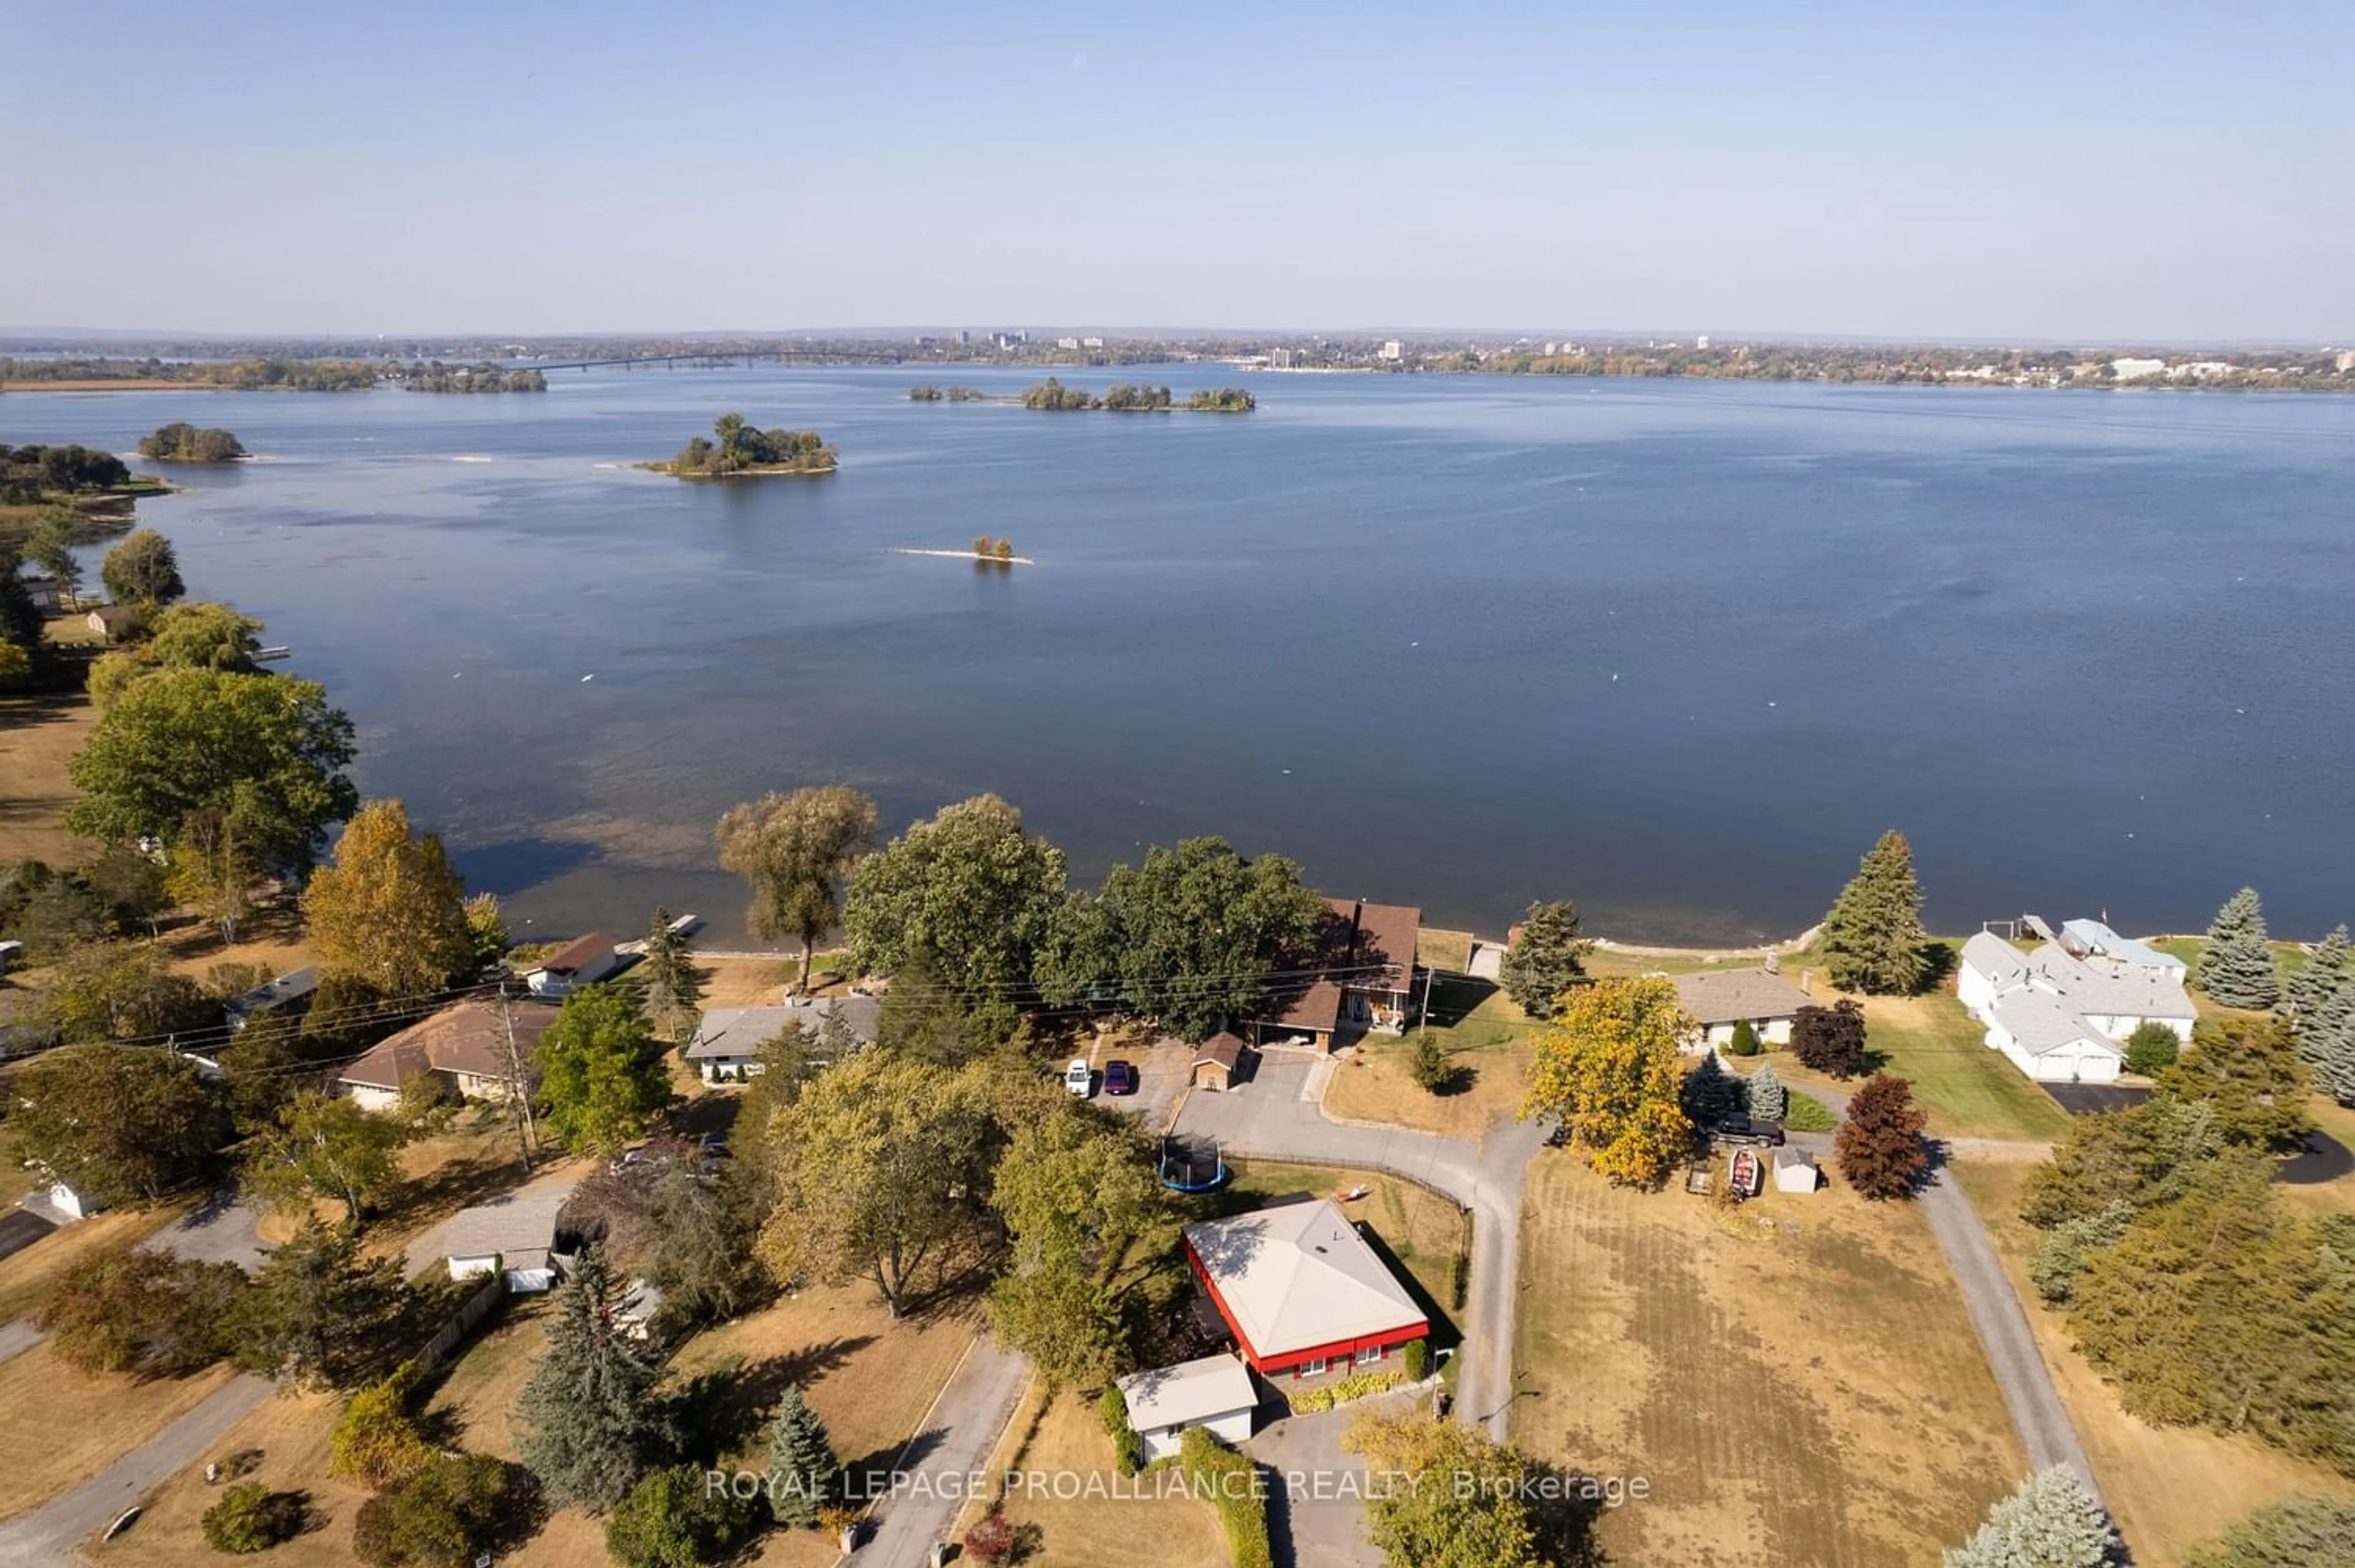 Lakeview for 35 Peats Point Rd, Prince Edward County Ontario K8N 4Z7